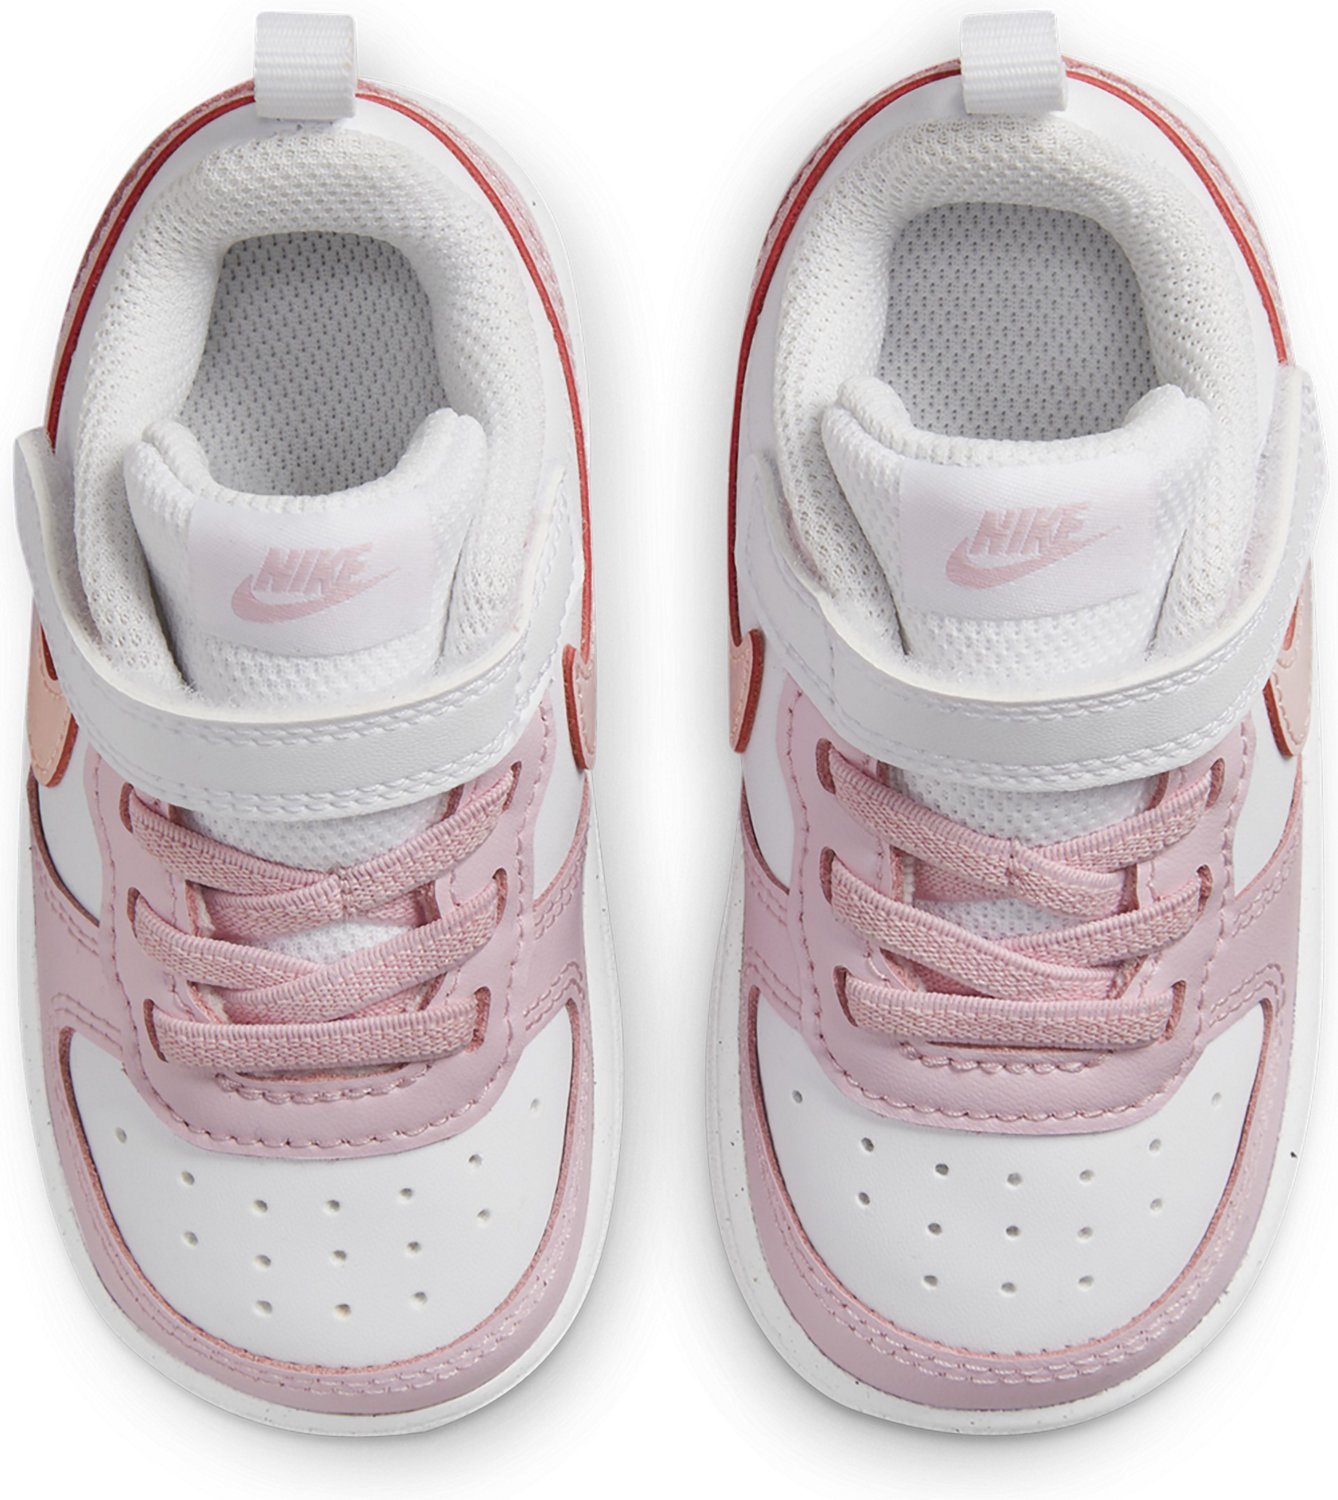 Nike Toddler Court Borough Low 2 SE1 Shoes Academy